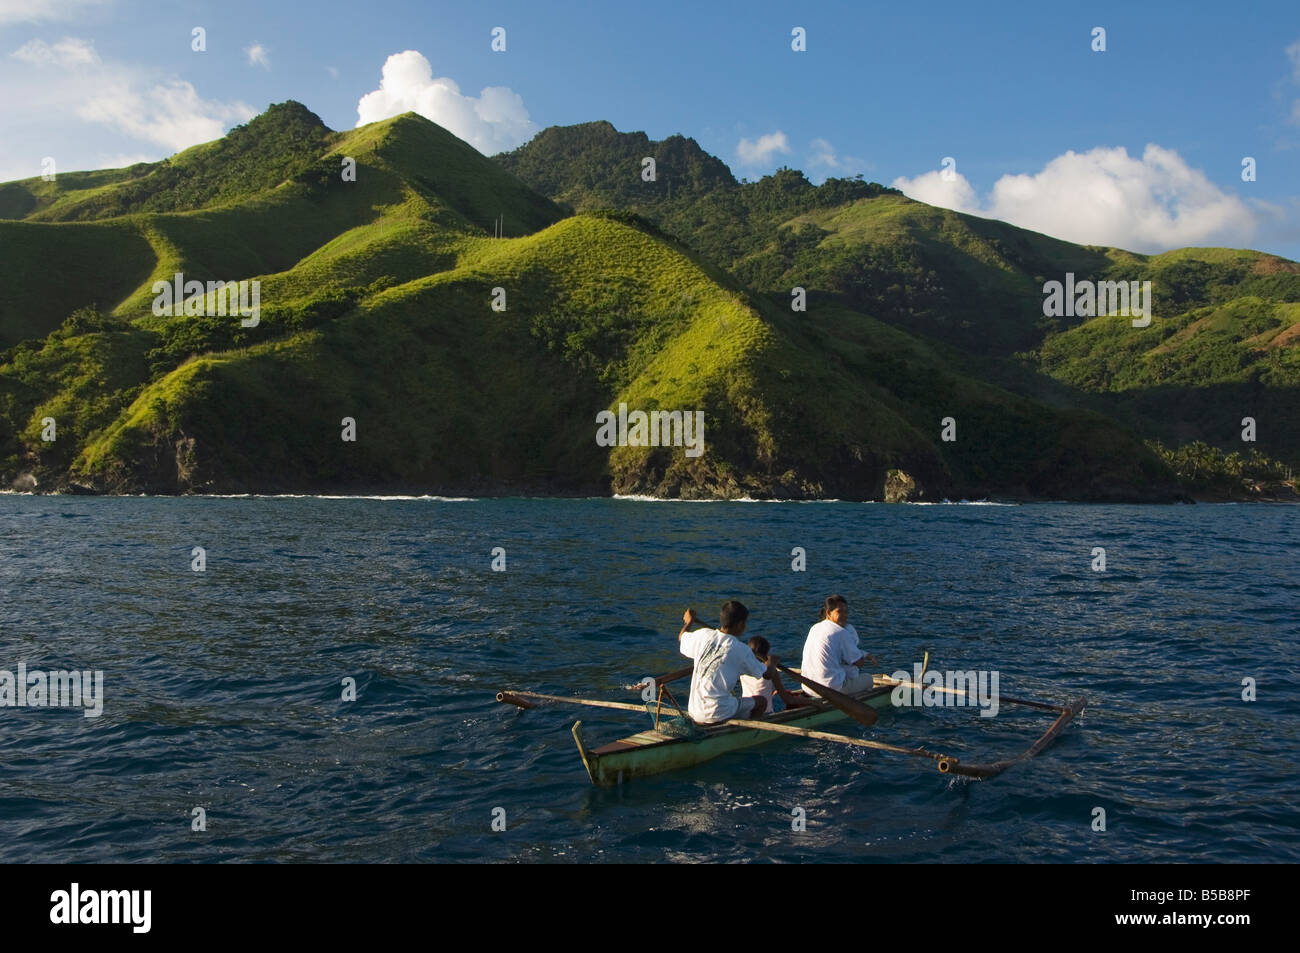 Spectacular coastal scenery and small fishing boat, Camarines Sur, Caramoan National Park, Bicol Province, Philippines Stock Photo